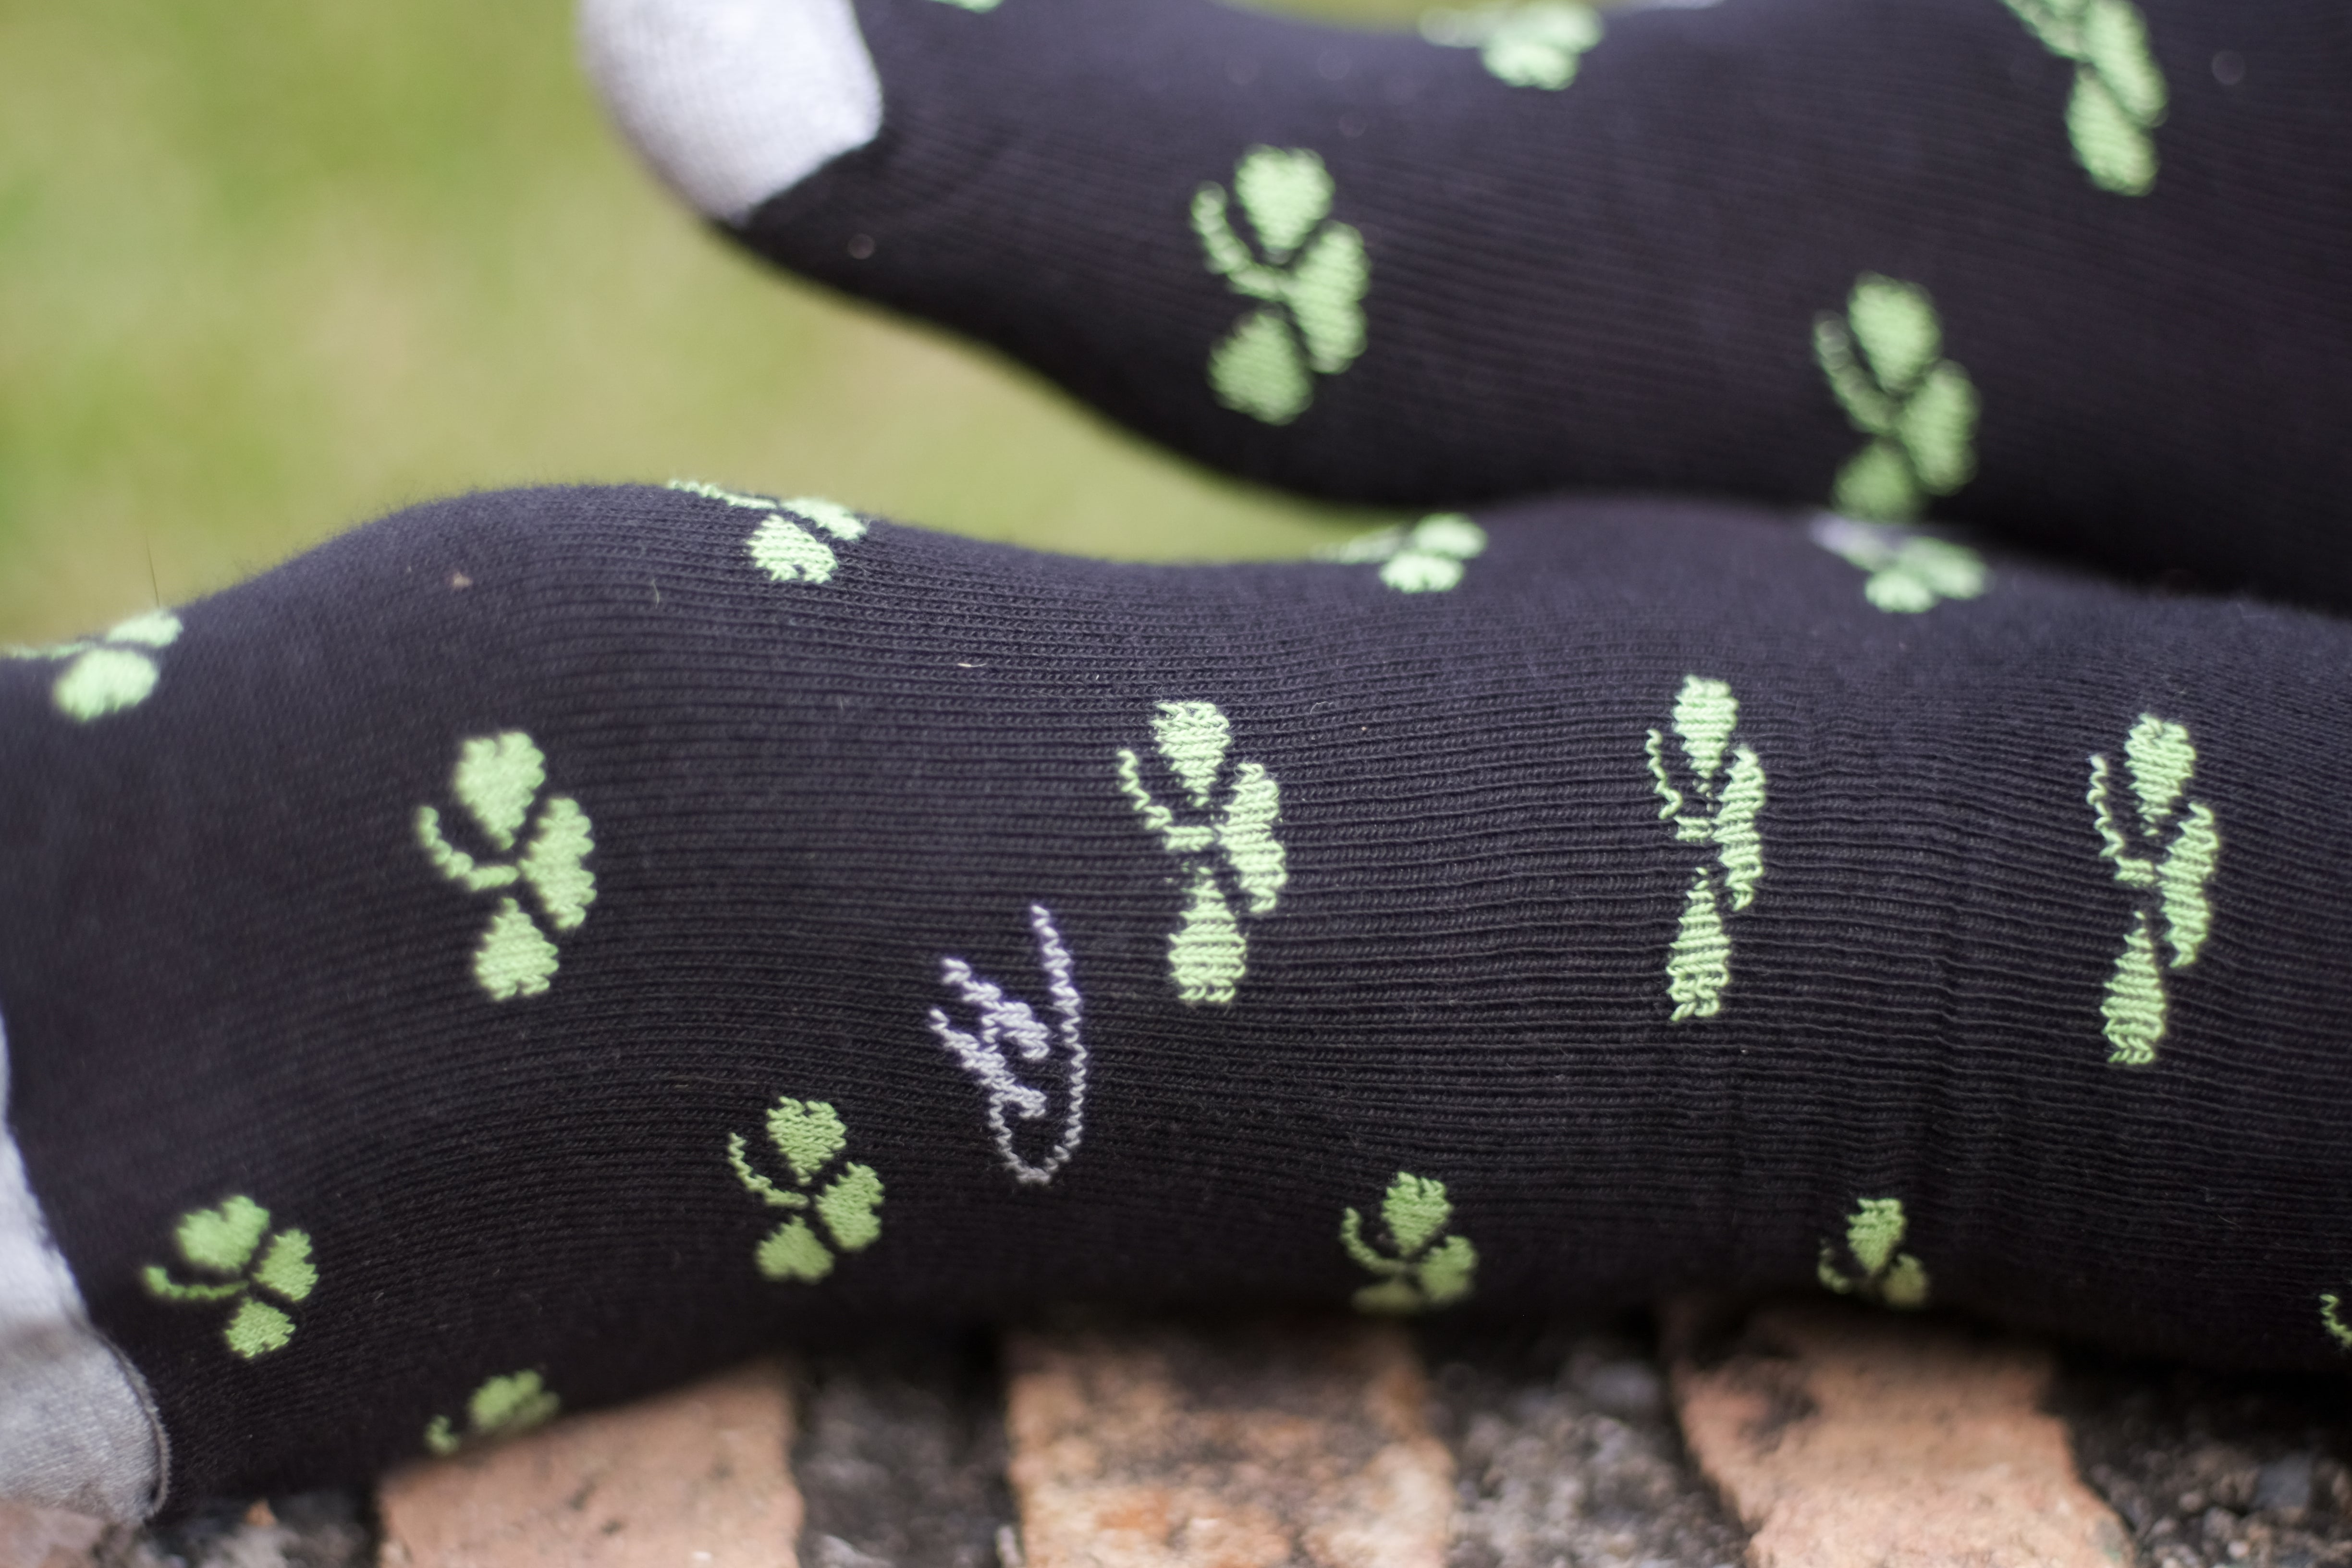 Black over the calf dress socks with green clover pattern